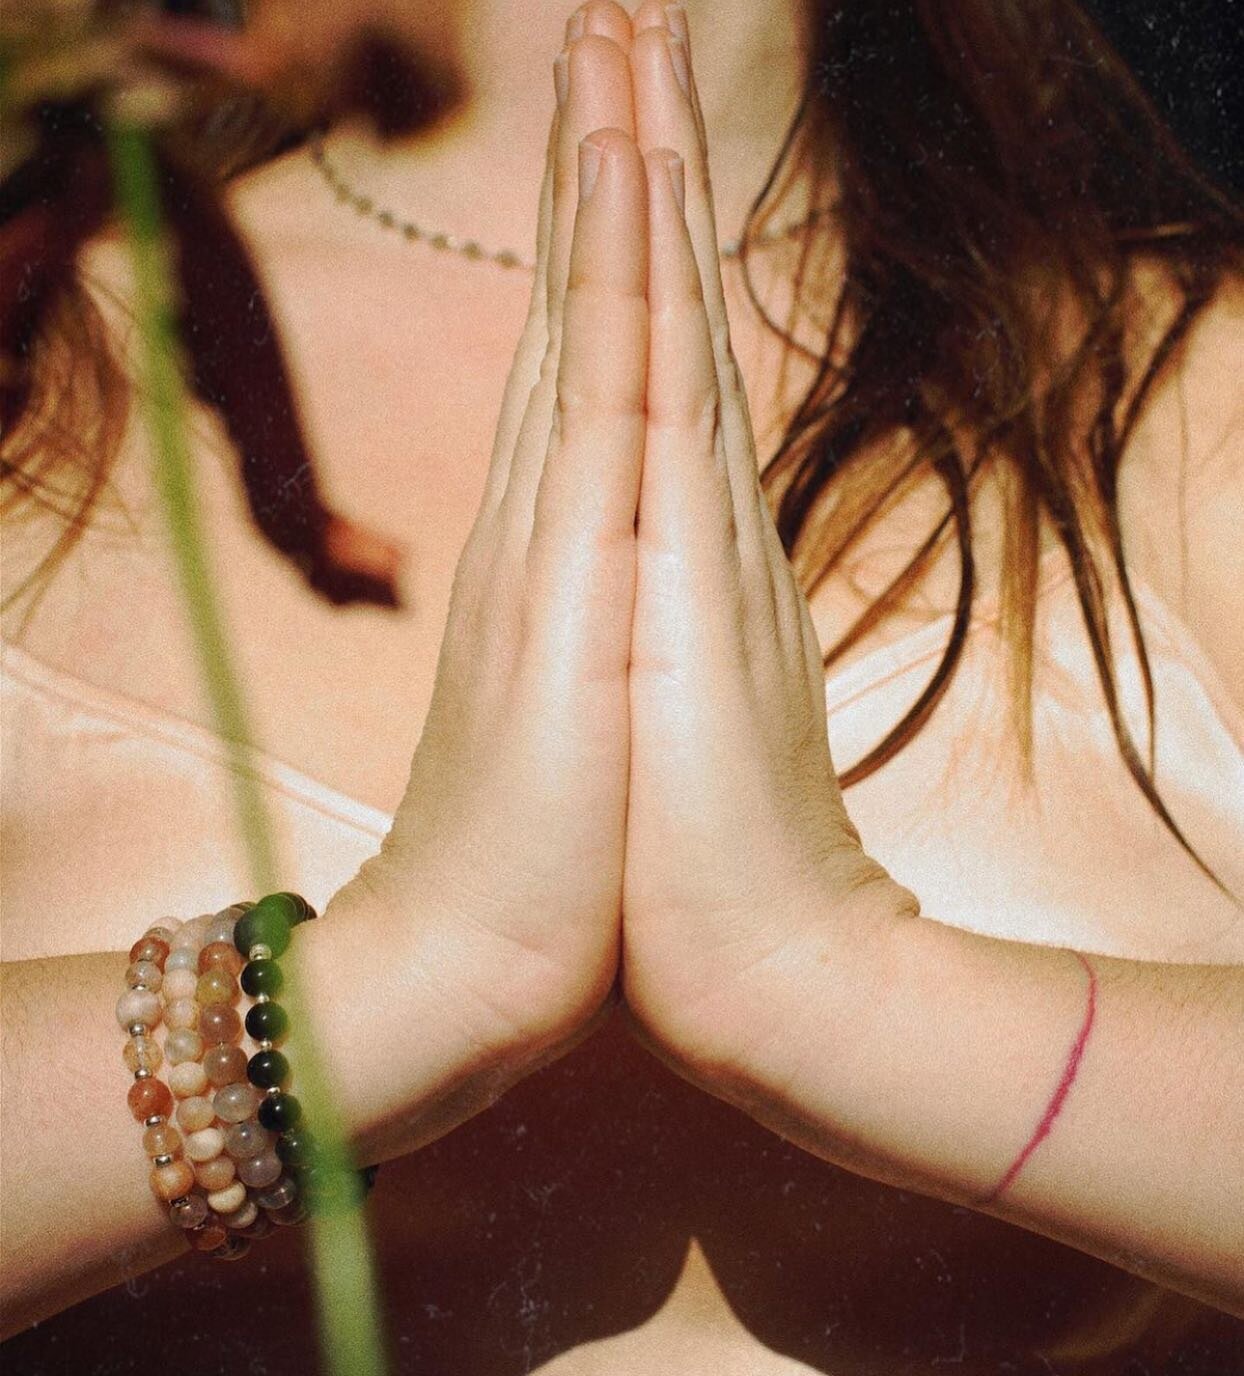 &ldquo;Prayer is a resonance of intention to the universe and a reminder to yourself of what you already know&ldquo; ✨ image by @charlottealexandrakiss for @wildanddivineholistics @vvallvvall